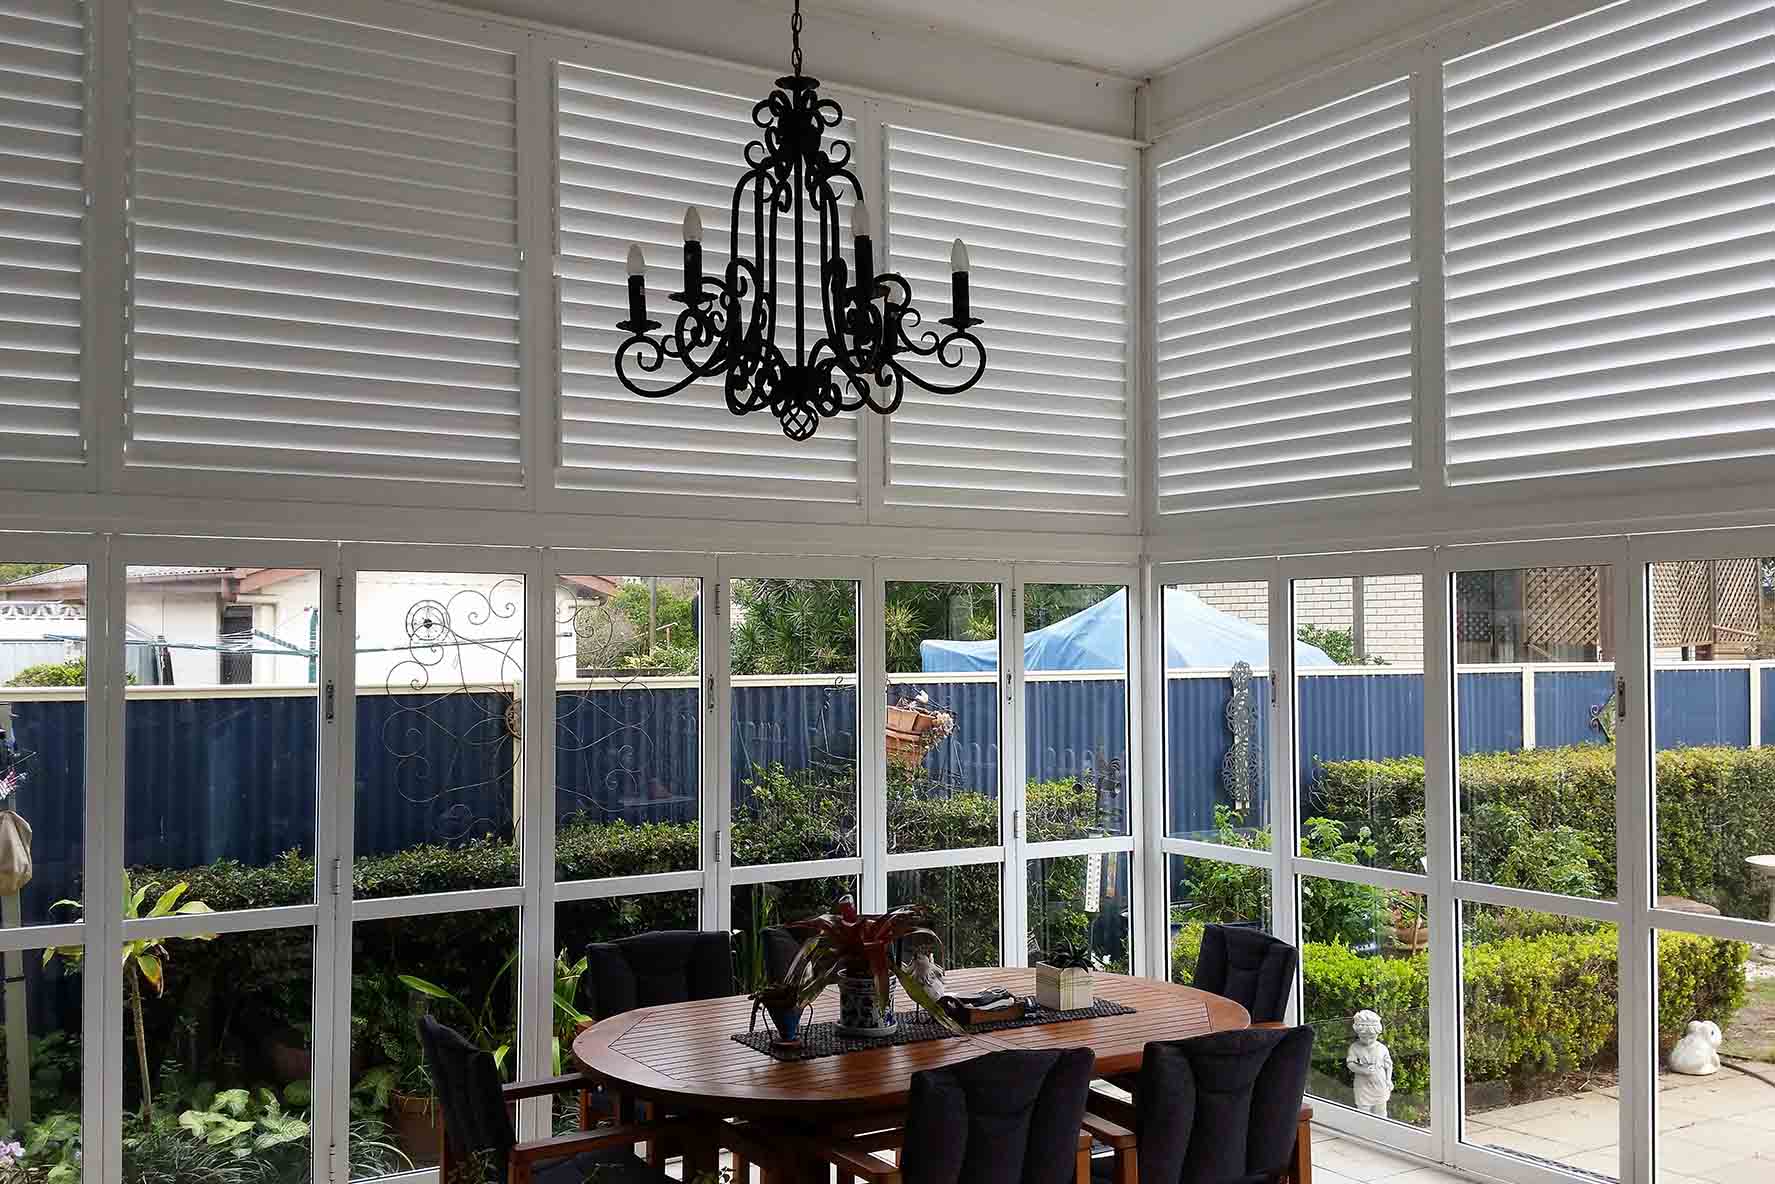 Bifolding Shutters on a Ground Floor Patio